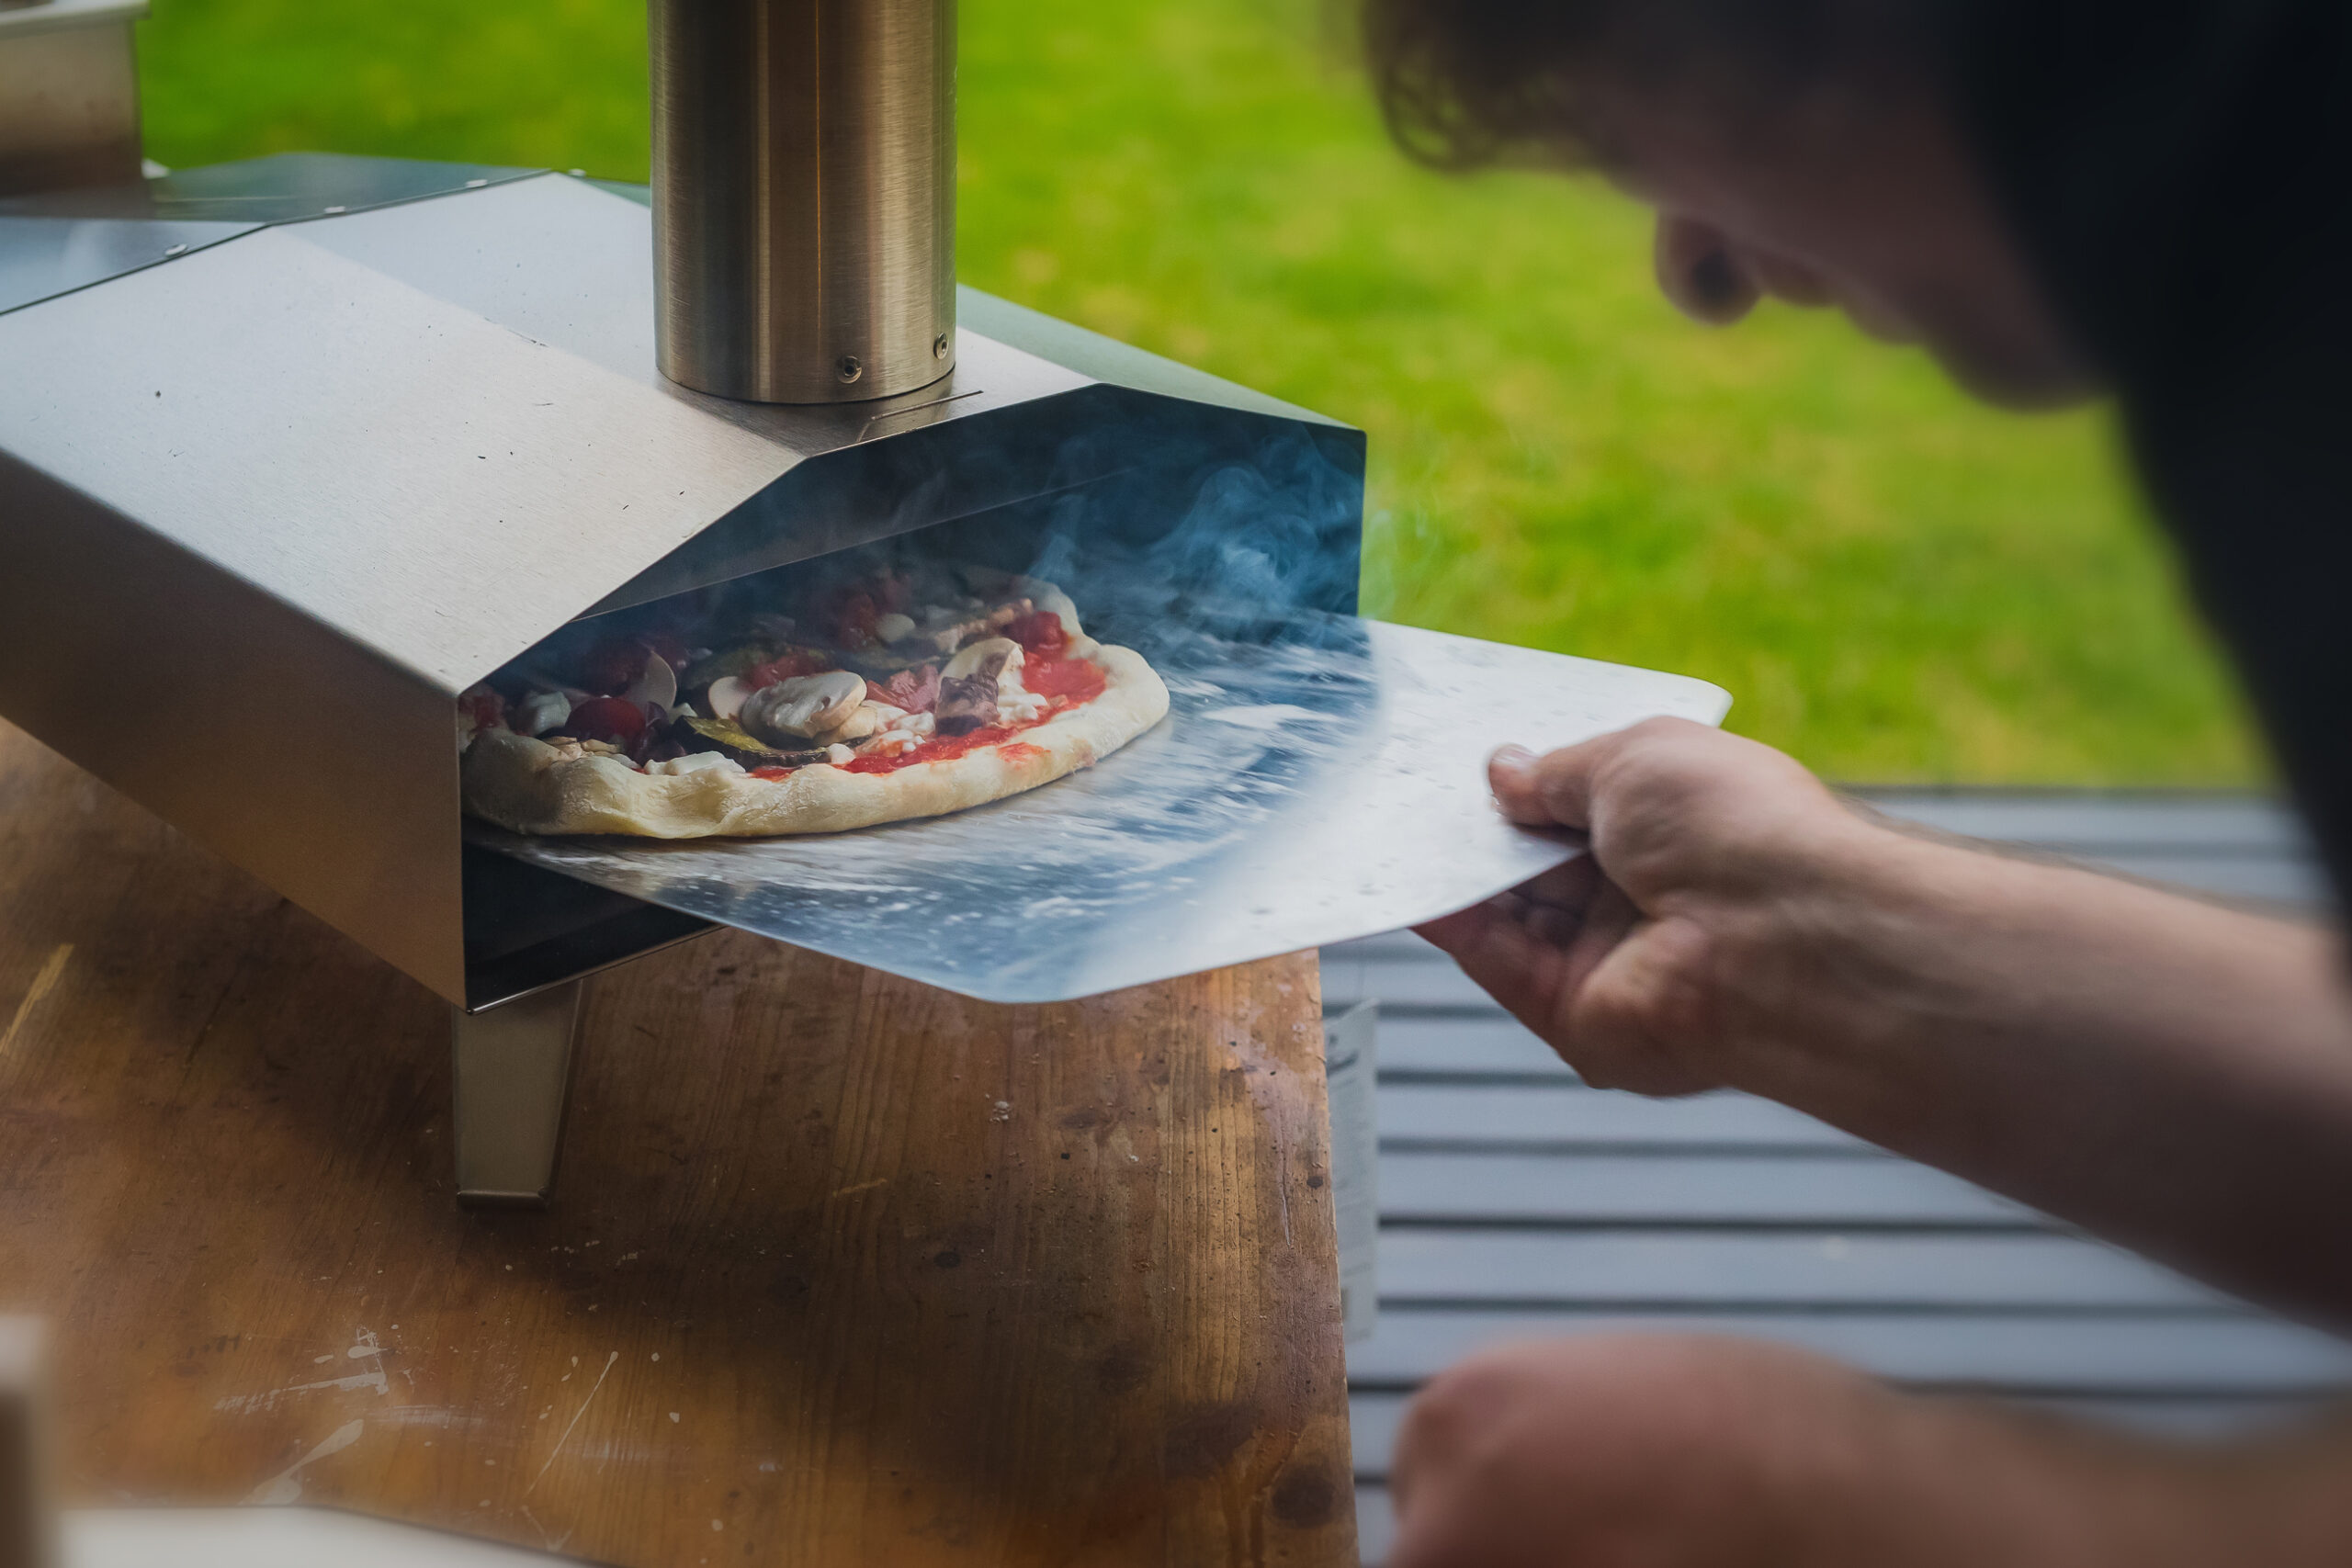 Man is pulling a delicious fresh home made pizza out of a stainless steel home portble oven fueled by pellets. Outdoor pizza party.